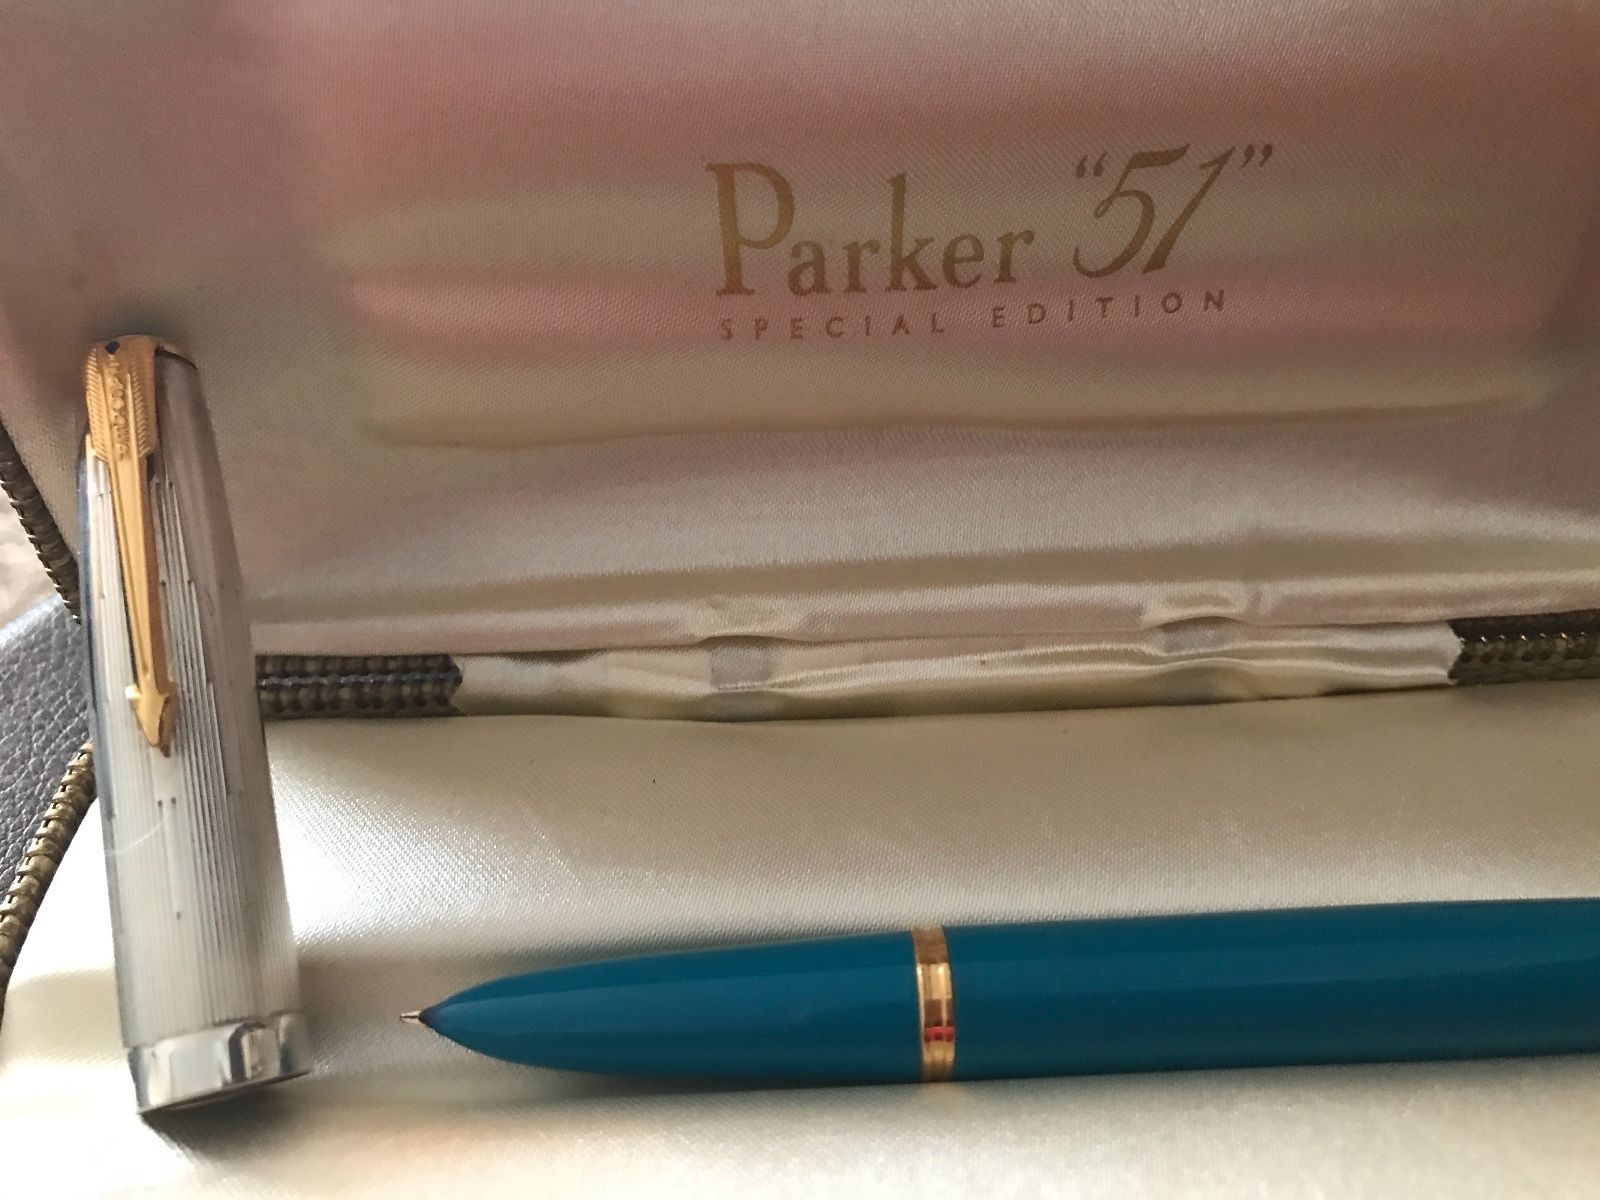 Parker 51 Special Edition Fountain Pen, Silver and 22ct Gold Cap